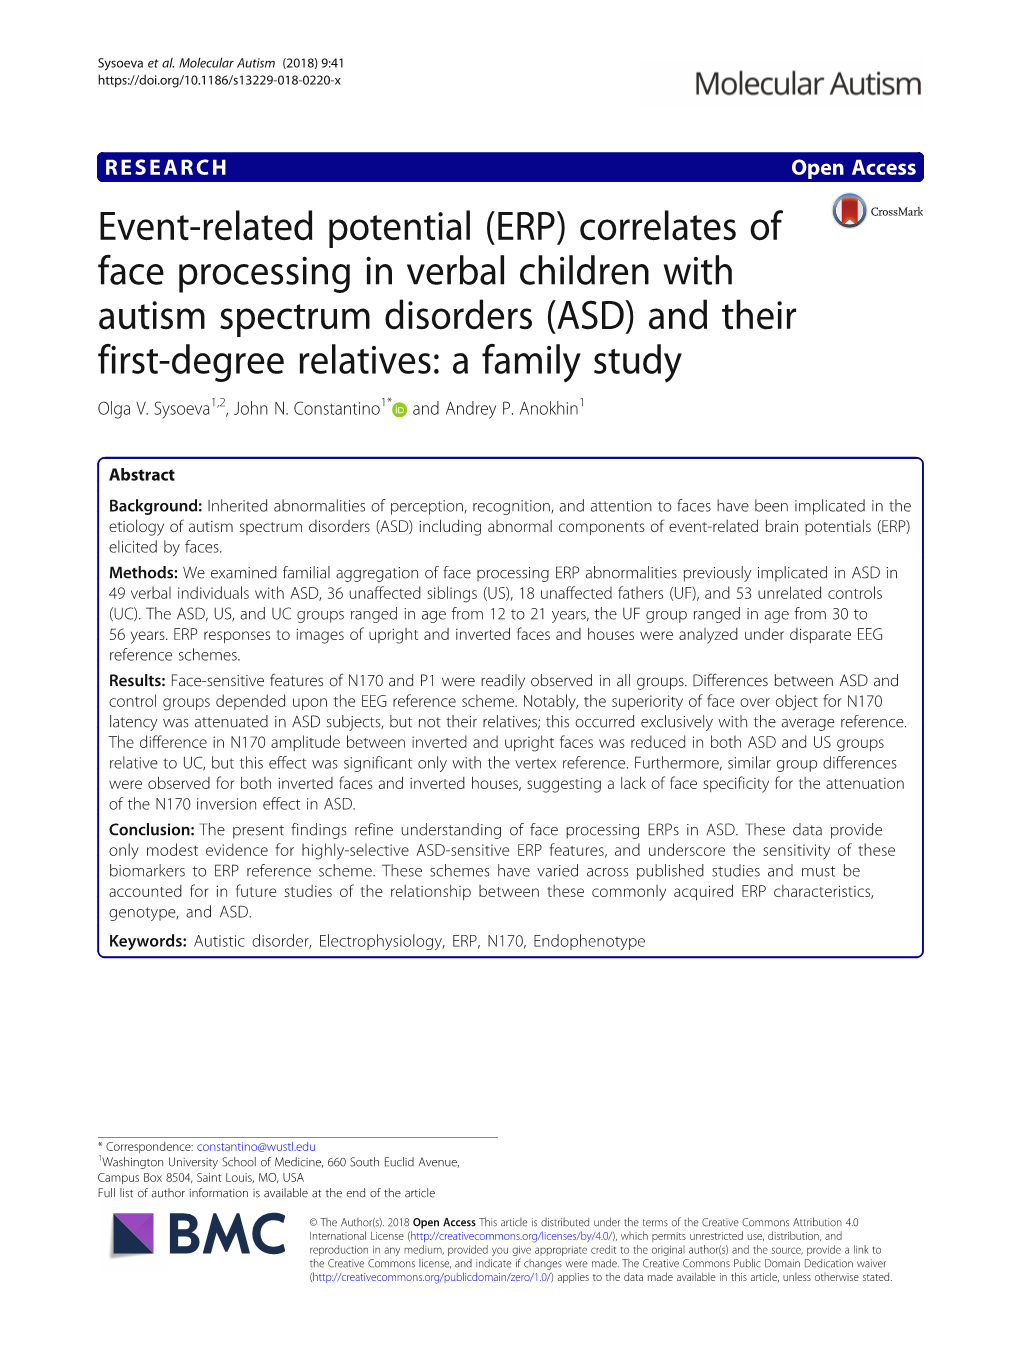 ERP) Correlates of Face Processing in Verbal Children with Autism Spectrum Disorders (ASD) and Their First-Degree Relatives: a Family Study Olga V